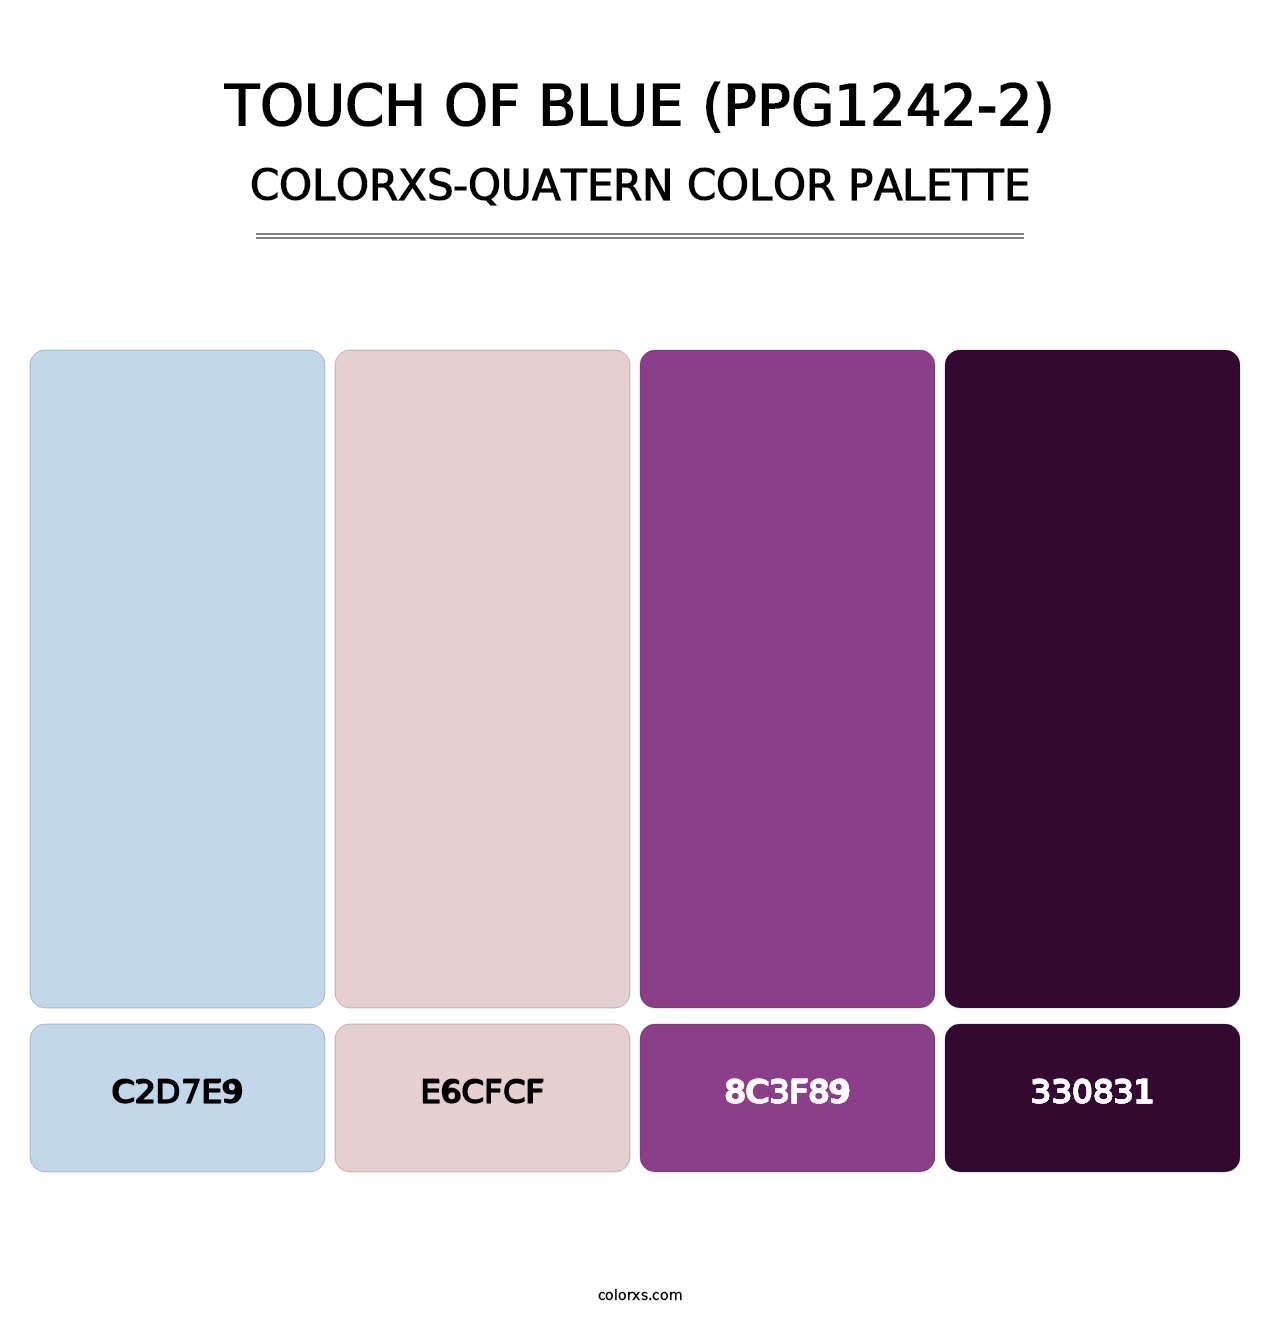 Touch Of Blue (PPG1242-2) - Colorxs Quatern Palette